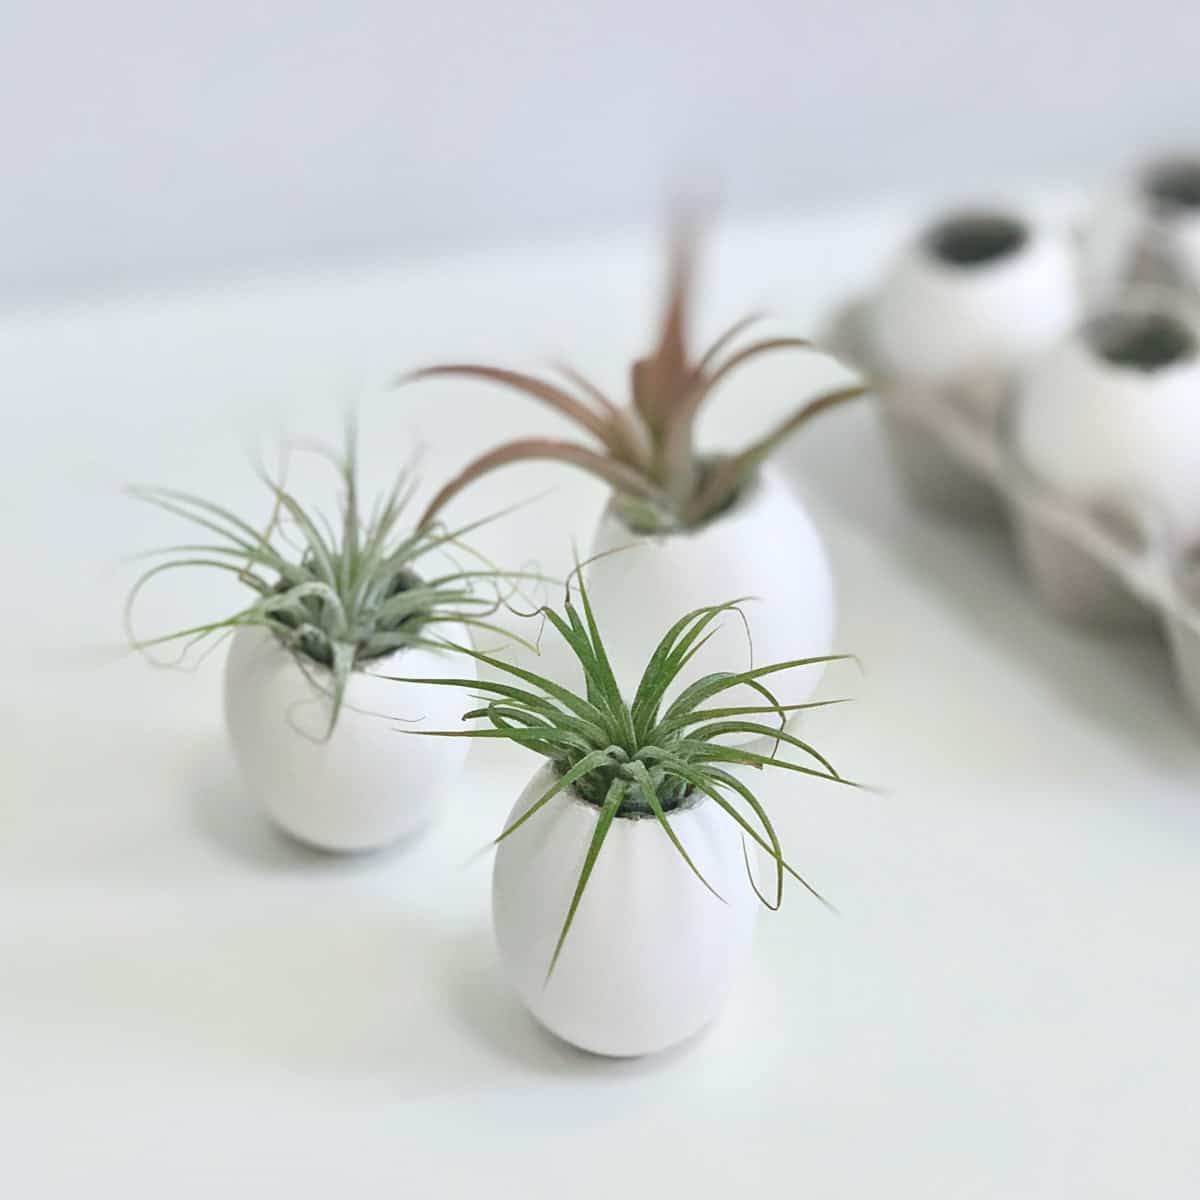 How to Make Concrete Eggshell Planters For Air Plants